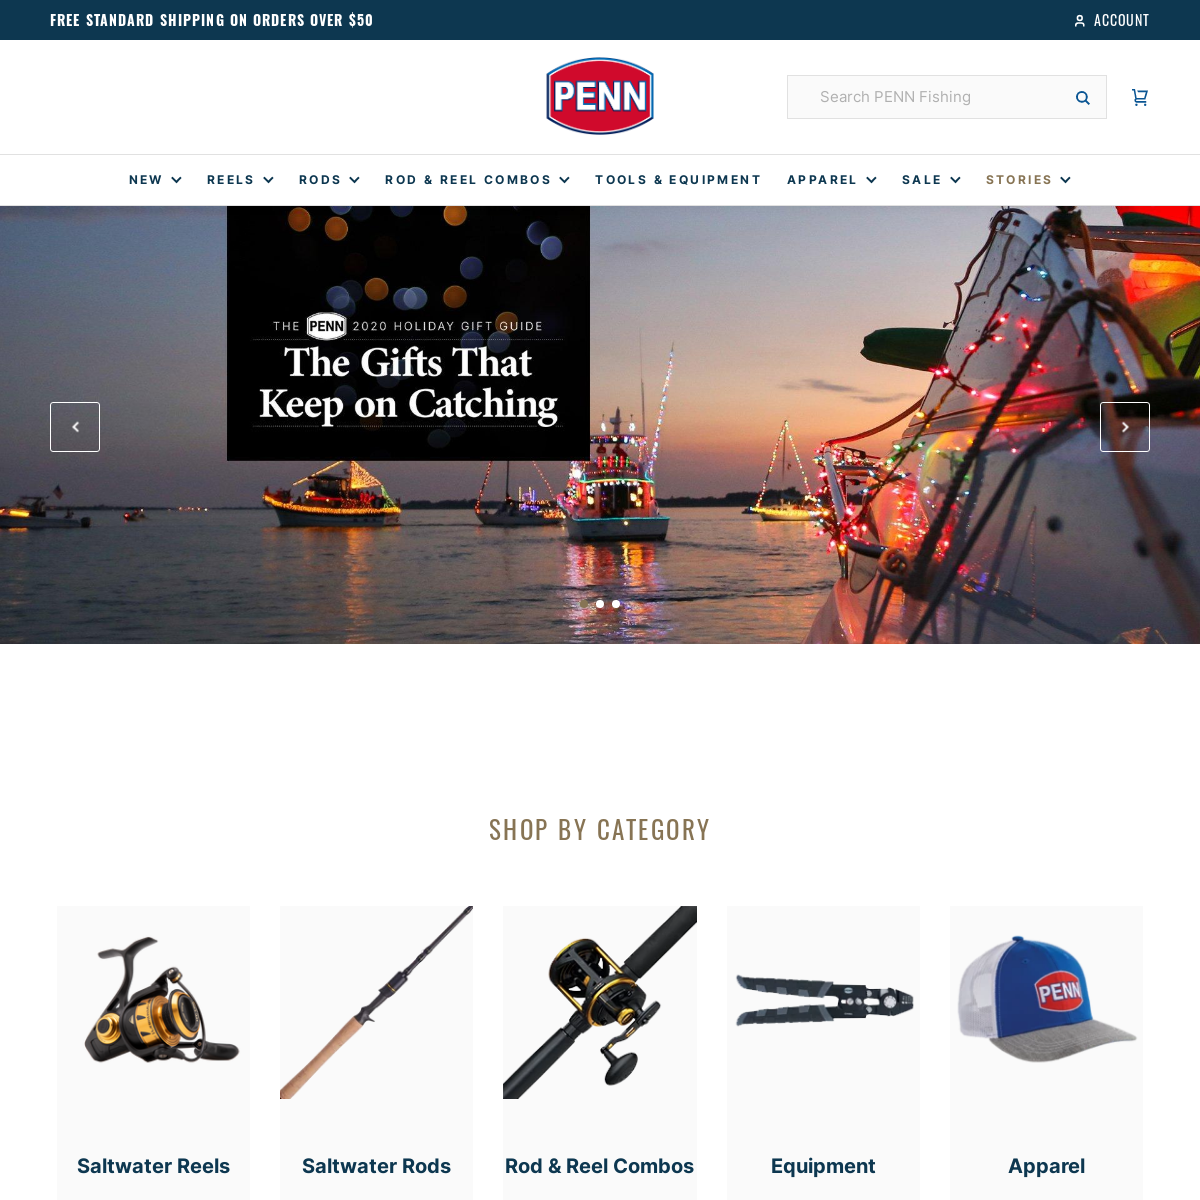 A complete backup of pennfishing.com